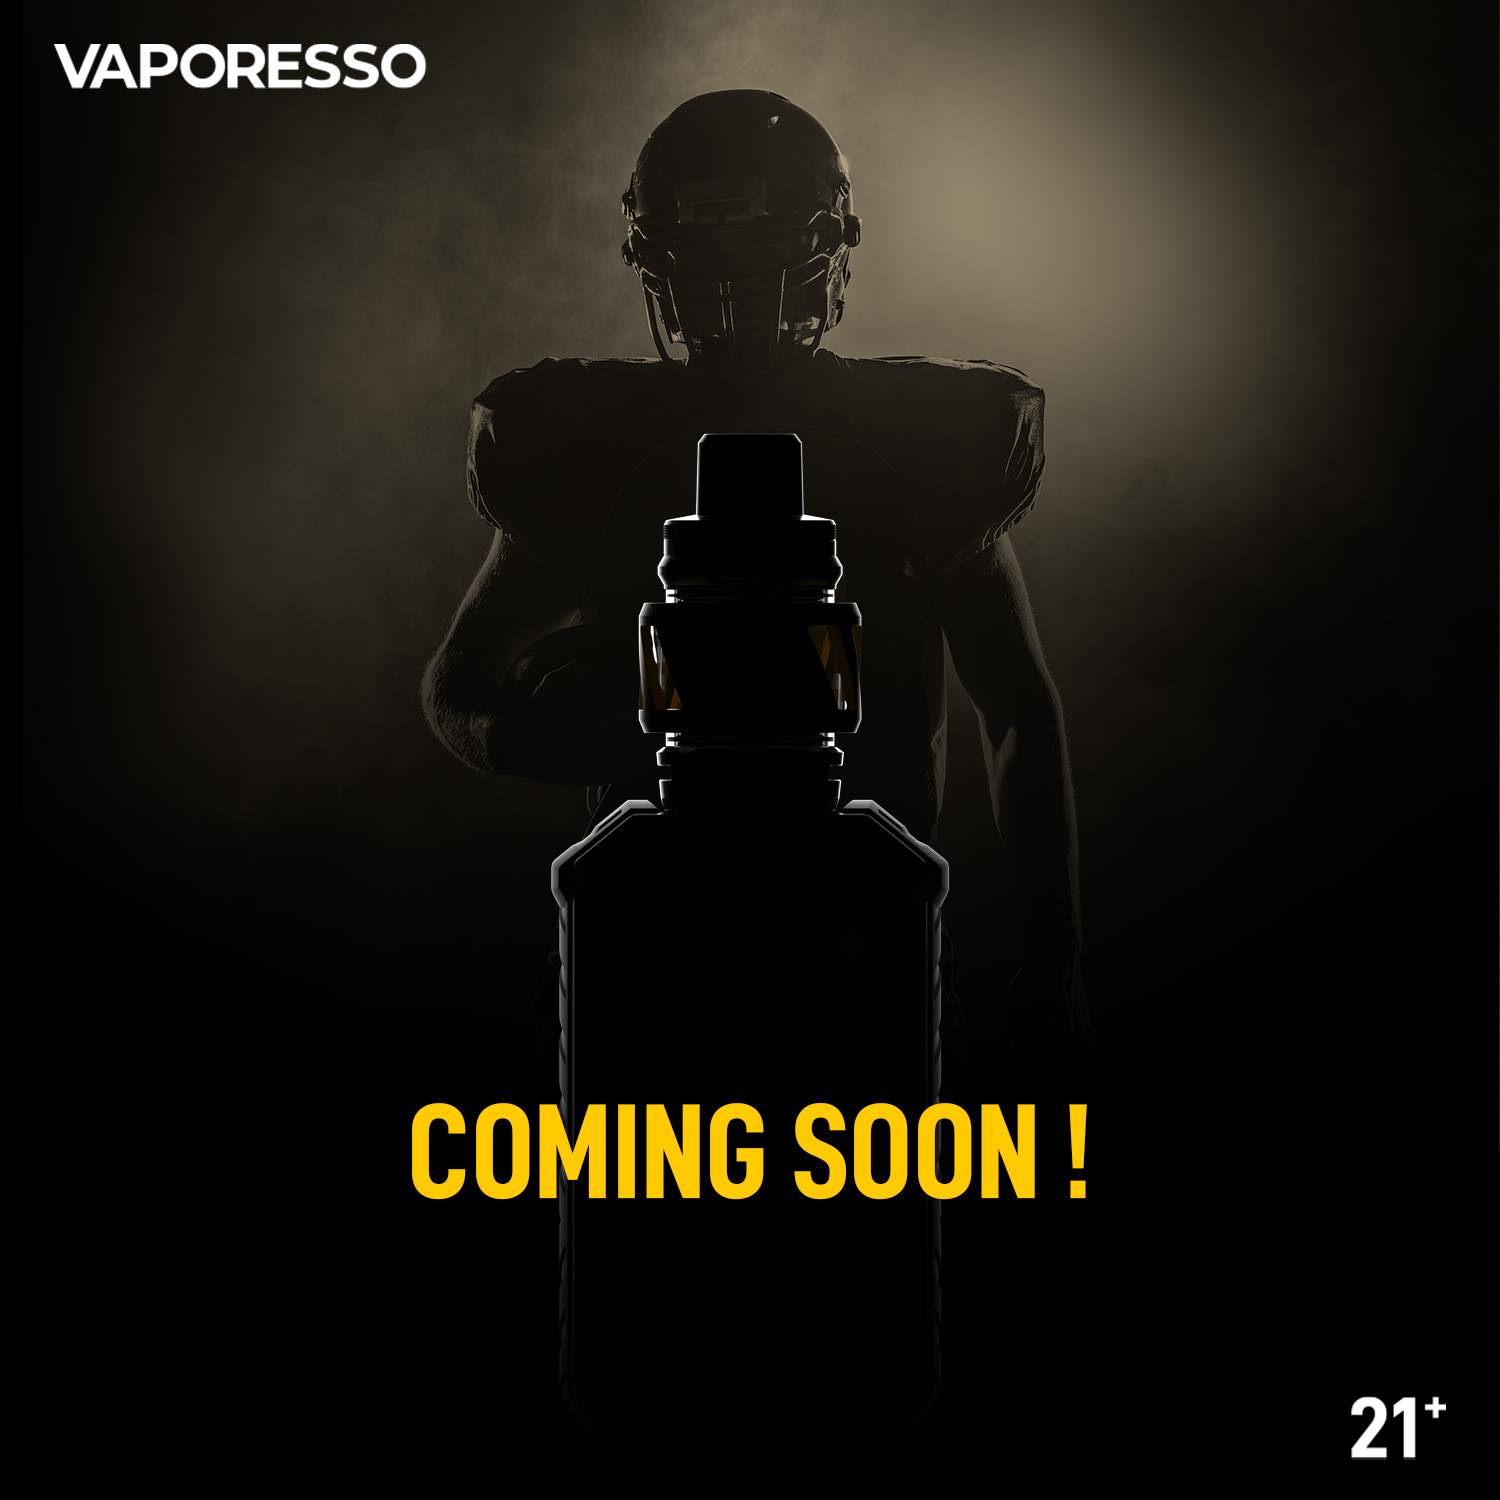 Vaporesso's Vaping Expedition: Navigating the High Seas of Flavorful Adventures